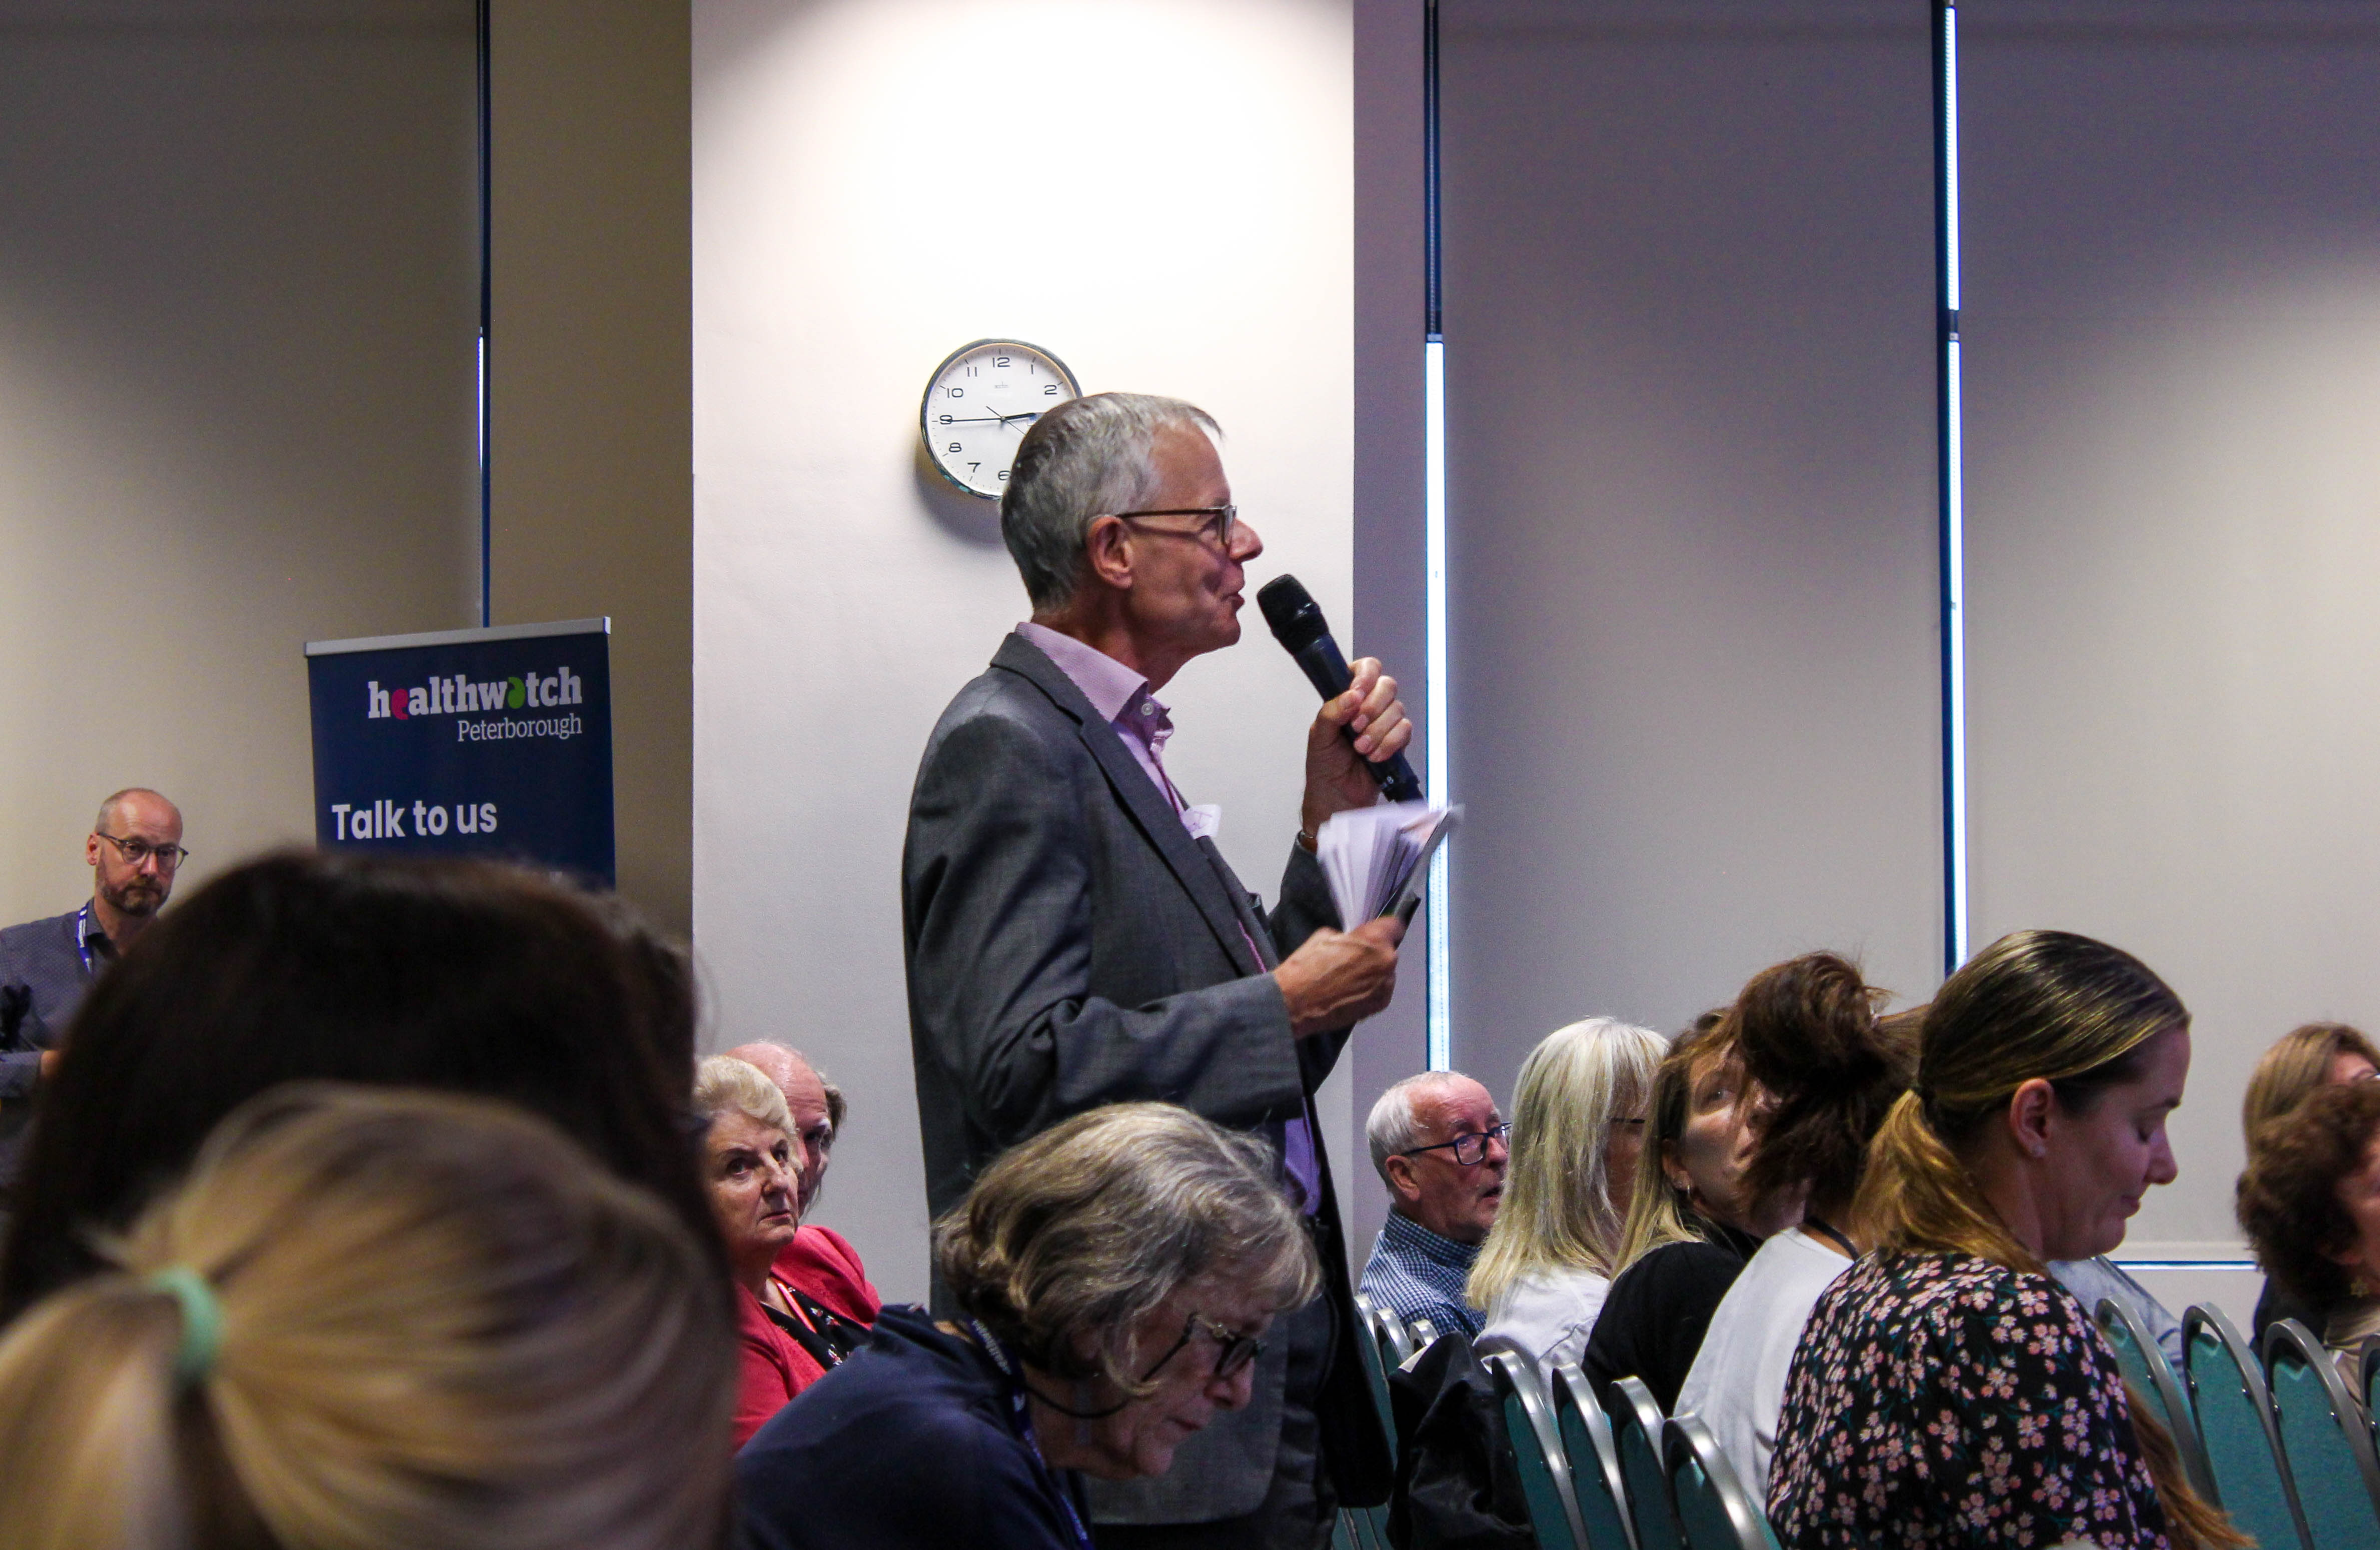 A member of our Question Time audience standing with a hand held microphone and asking a question to the panel